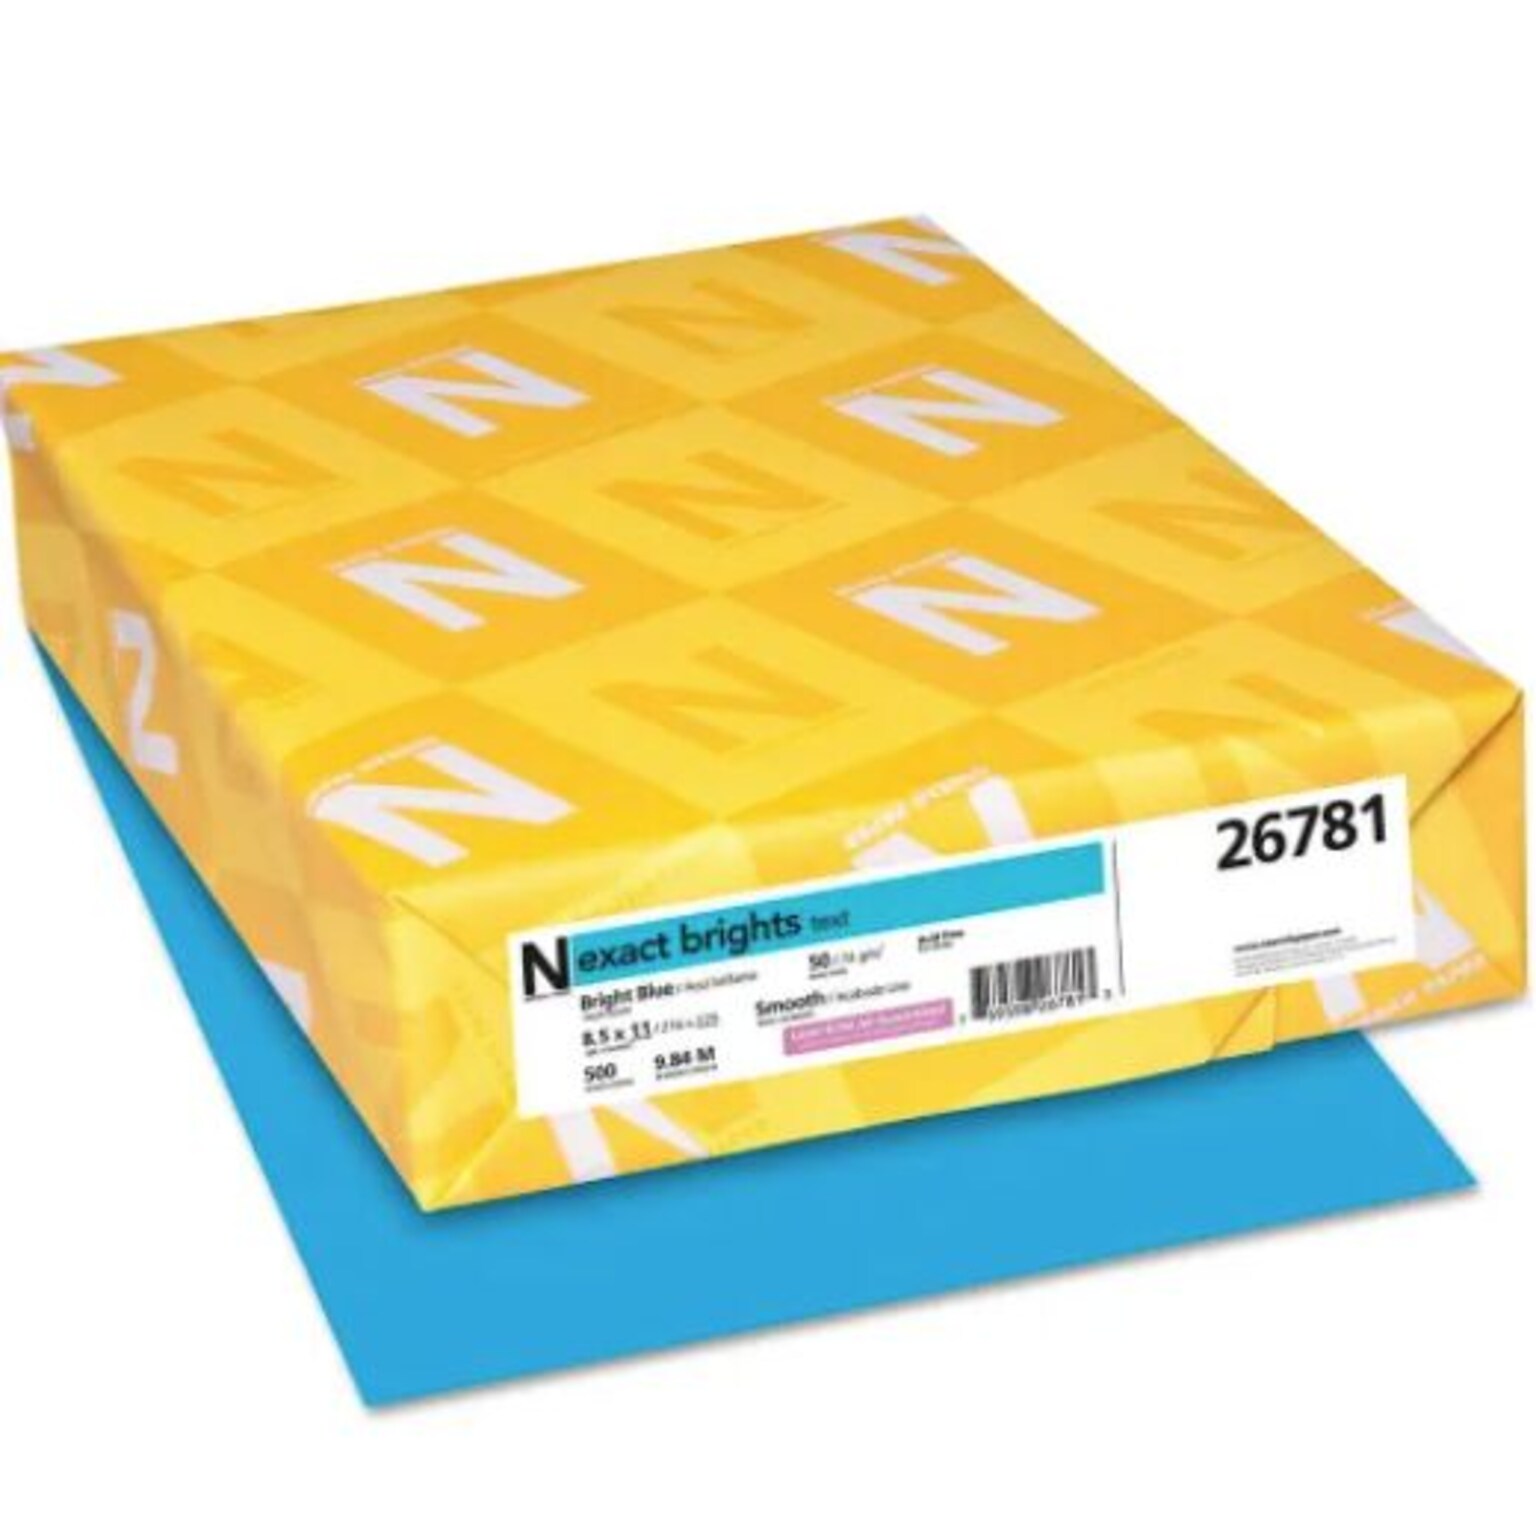 Exact Brights Colored Paper, 20 lbs., 8.5 x 11, Bright Blue, 500/Ream (26781)